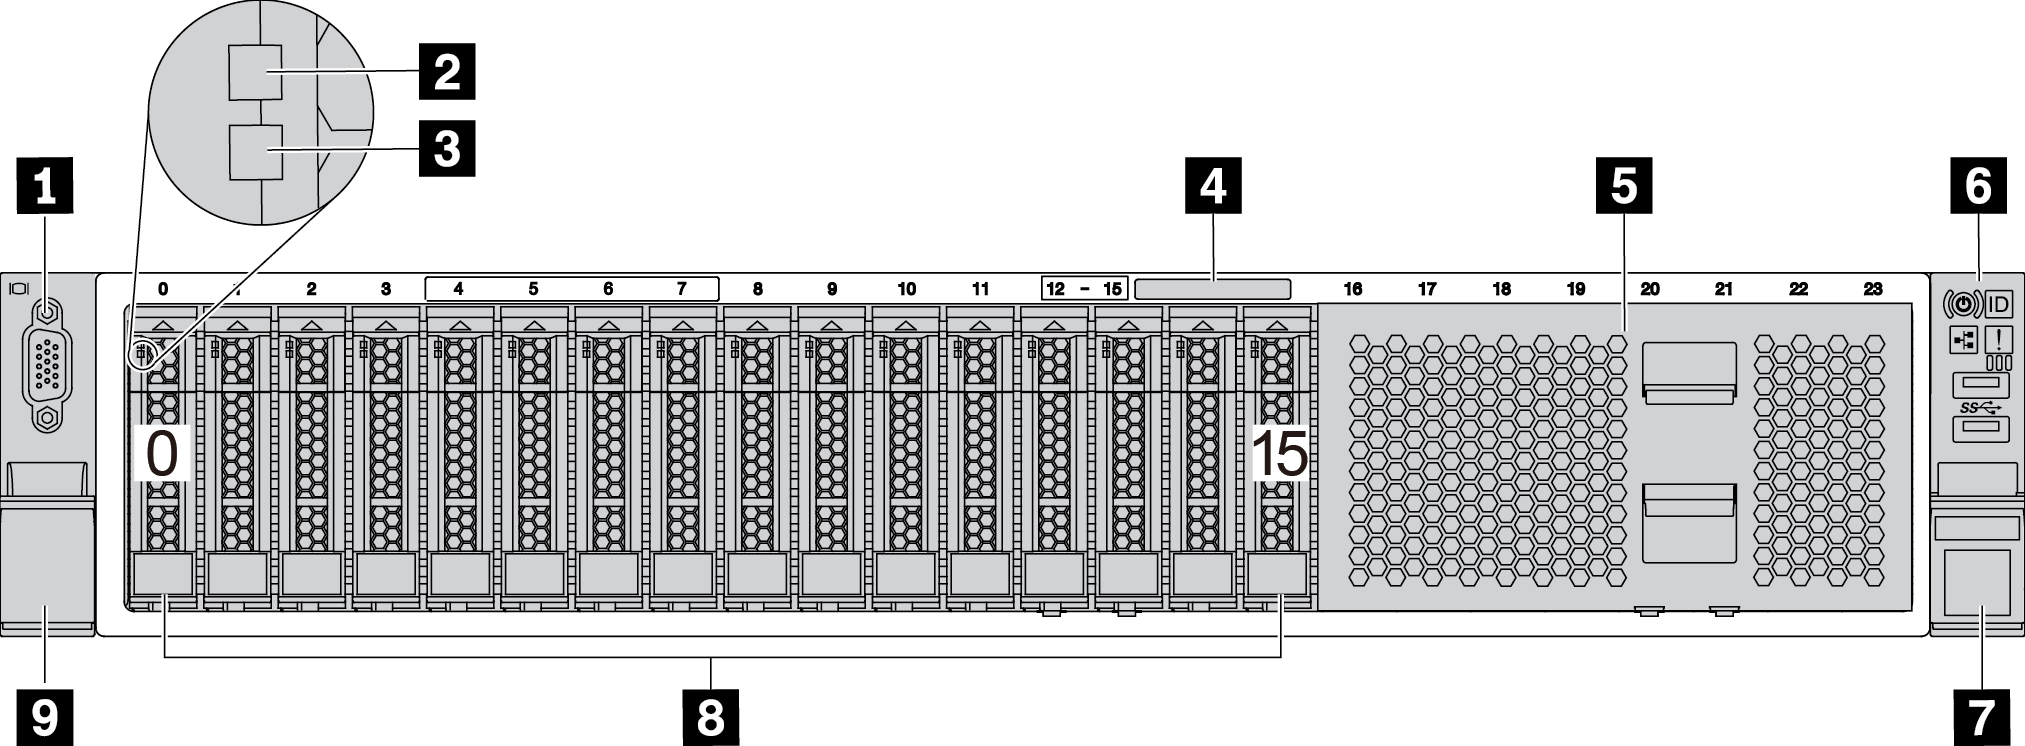 Front view of server models with sixteen 2.5-inch drive bays